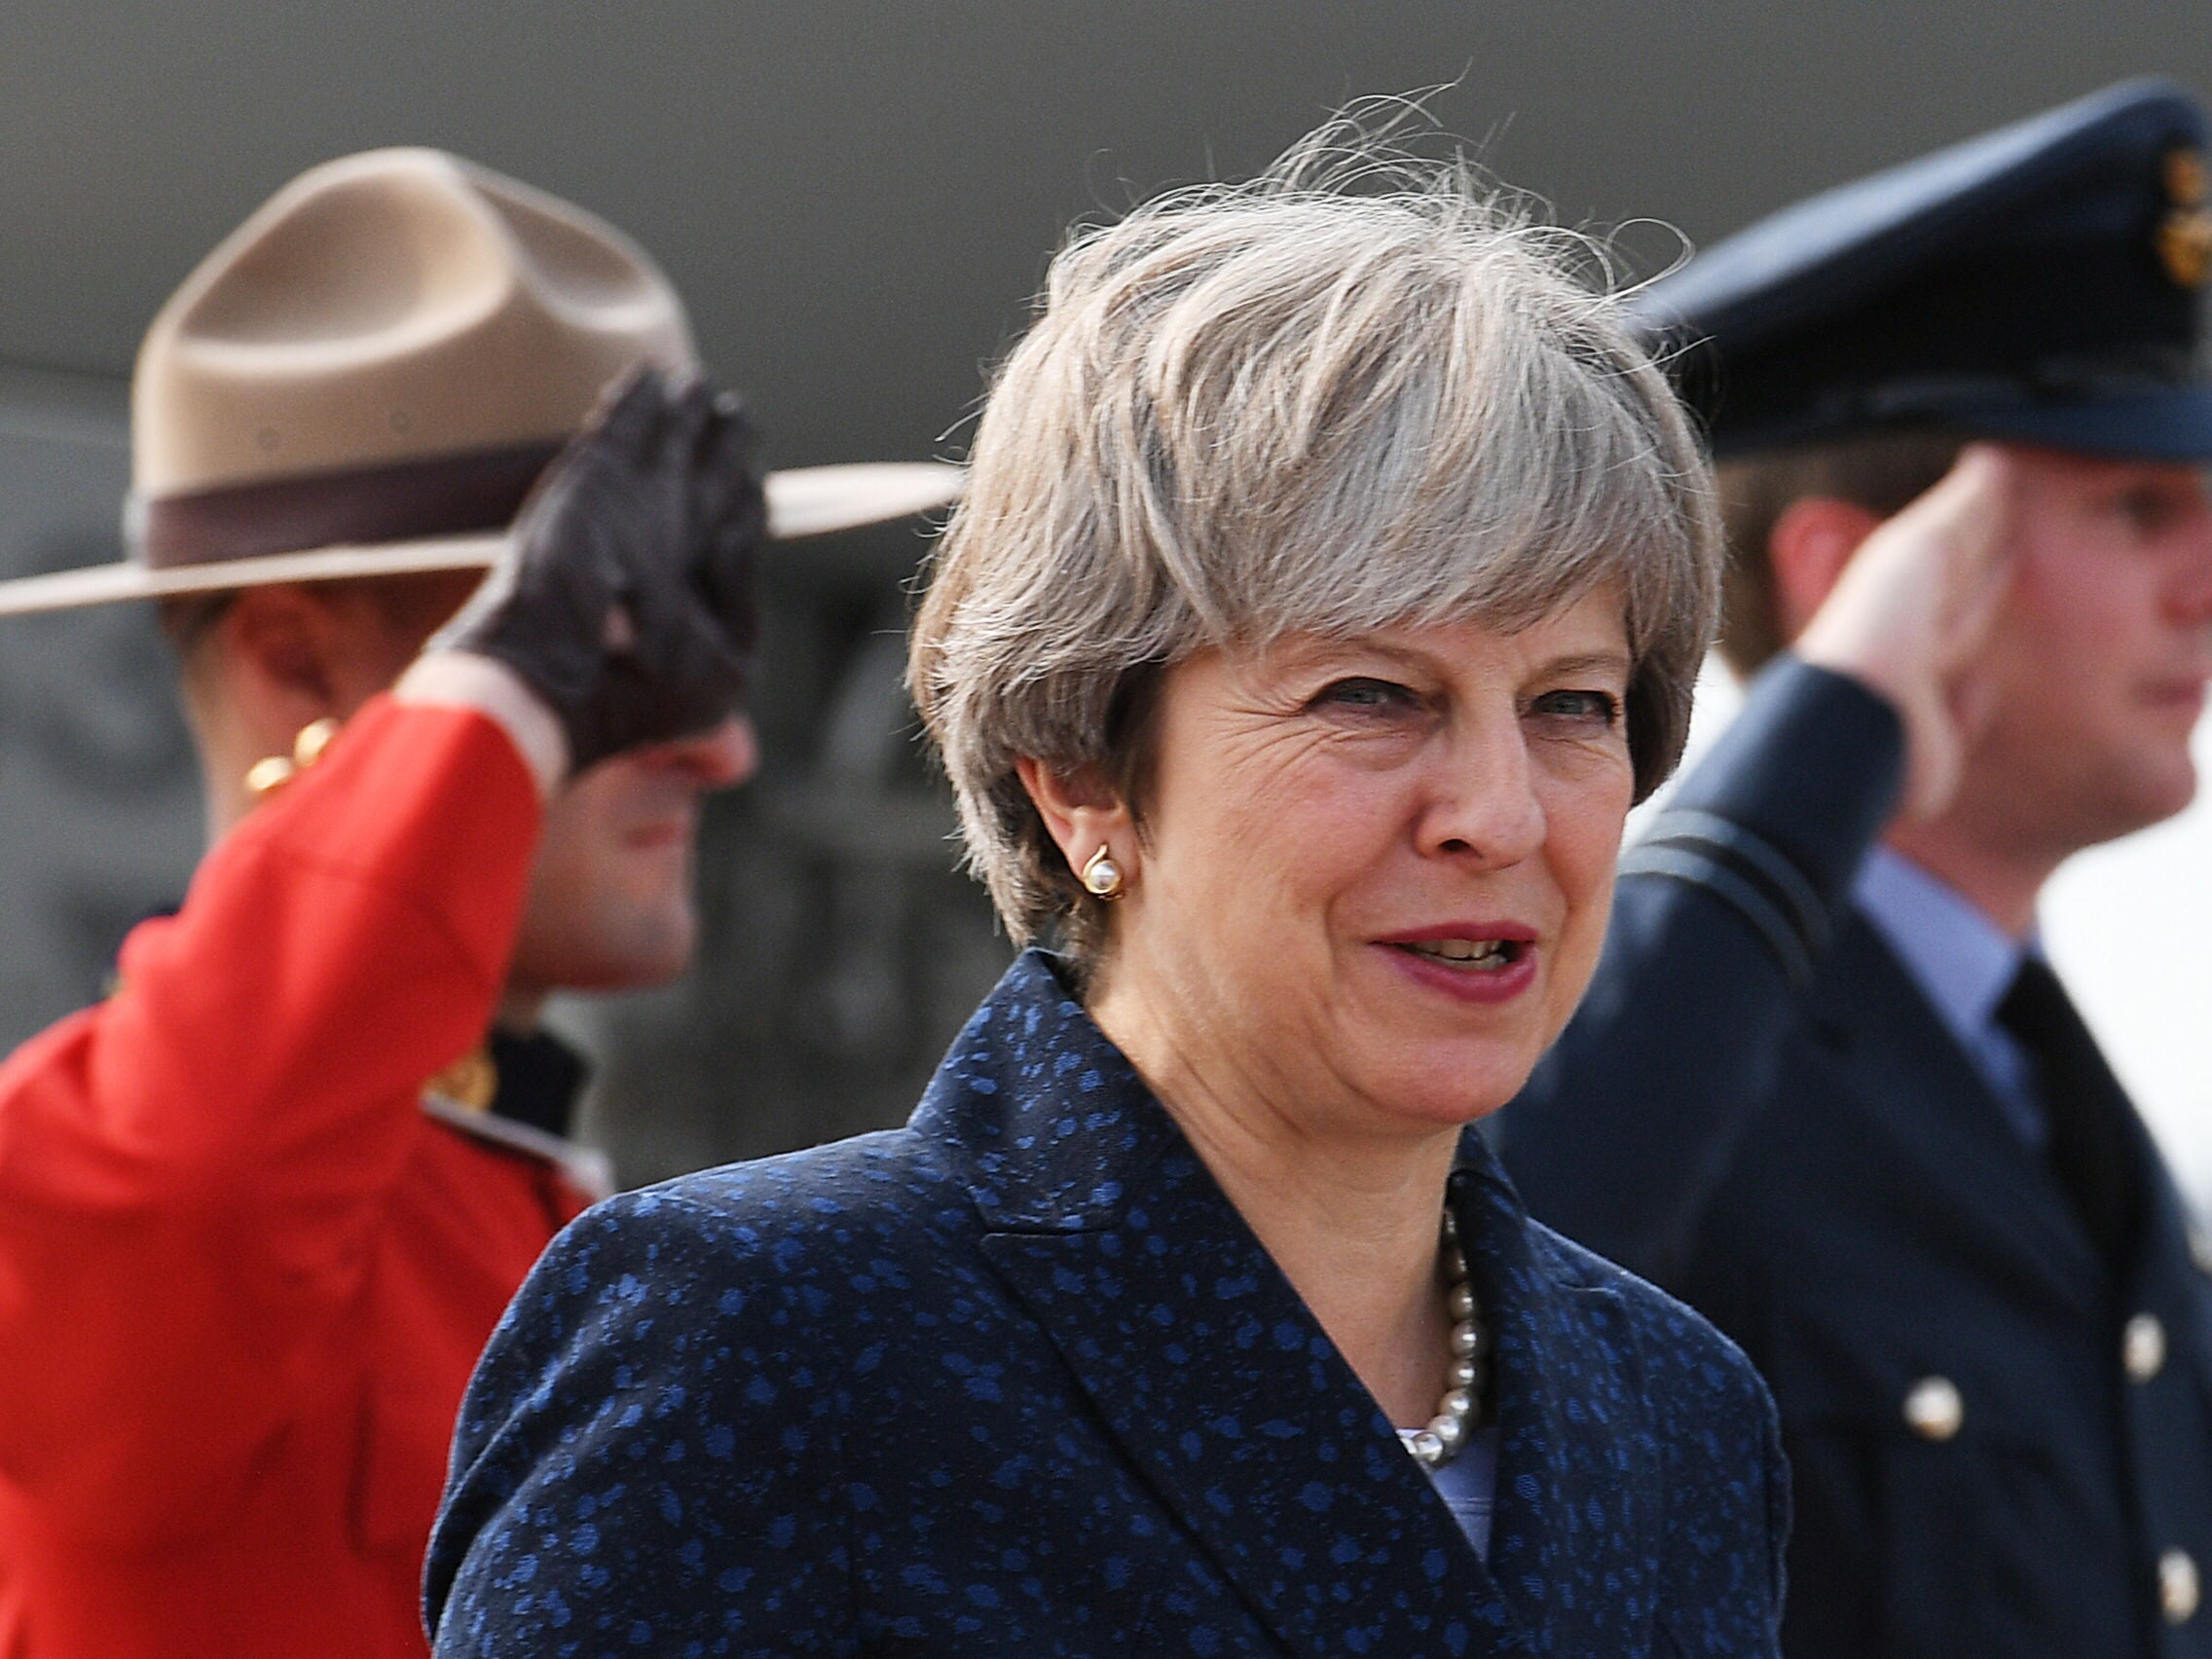 Prime Minister Theresa May arrives in Ottawa, Canada, to hold post-Brexit trade talks with Canadian Prime Minister Justin Trudeau